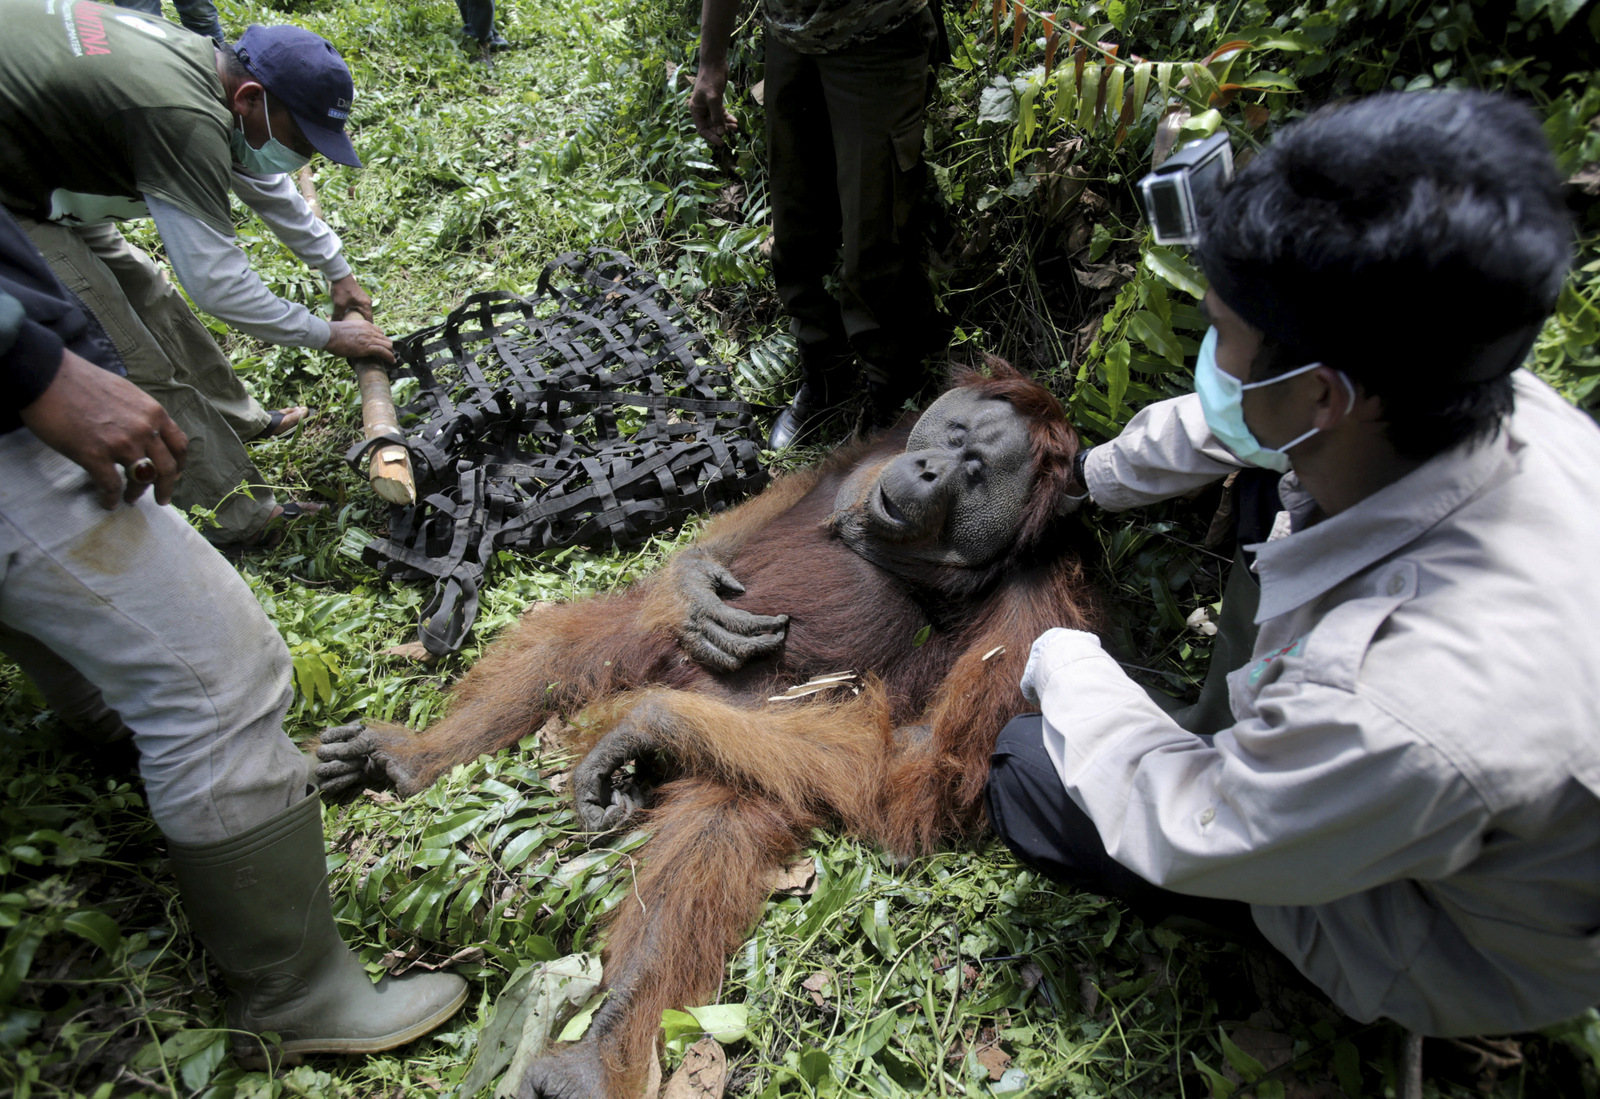 In this Thursday, Aug. 10, 2017 photo, conservationists of Sumatran Orangutan Conservation Program (SOCP) prepare a makeshift stretcher to carry a tranquilized male orangutan to be relocated from a swath of destructed forest located too close too a palm oil plantation at Tripa peat swamp in Aceh province, Indonesia. It's been called the orangutan capital of the world, but the great apes in Indonesia's Tripa peat forest on the island of Sumatra are under threat by palm oil plantations that have gobbled up thousands of acres of land to make room for trees that produce the most consumed vegetable oil on the planet. (AP Photo/Binsar Bakkara)